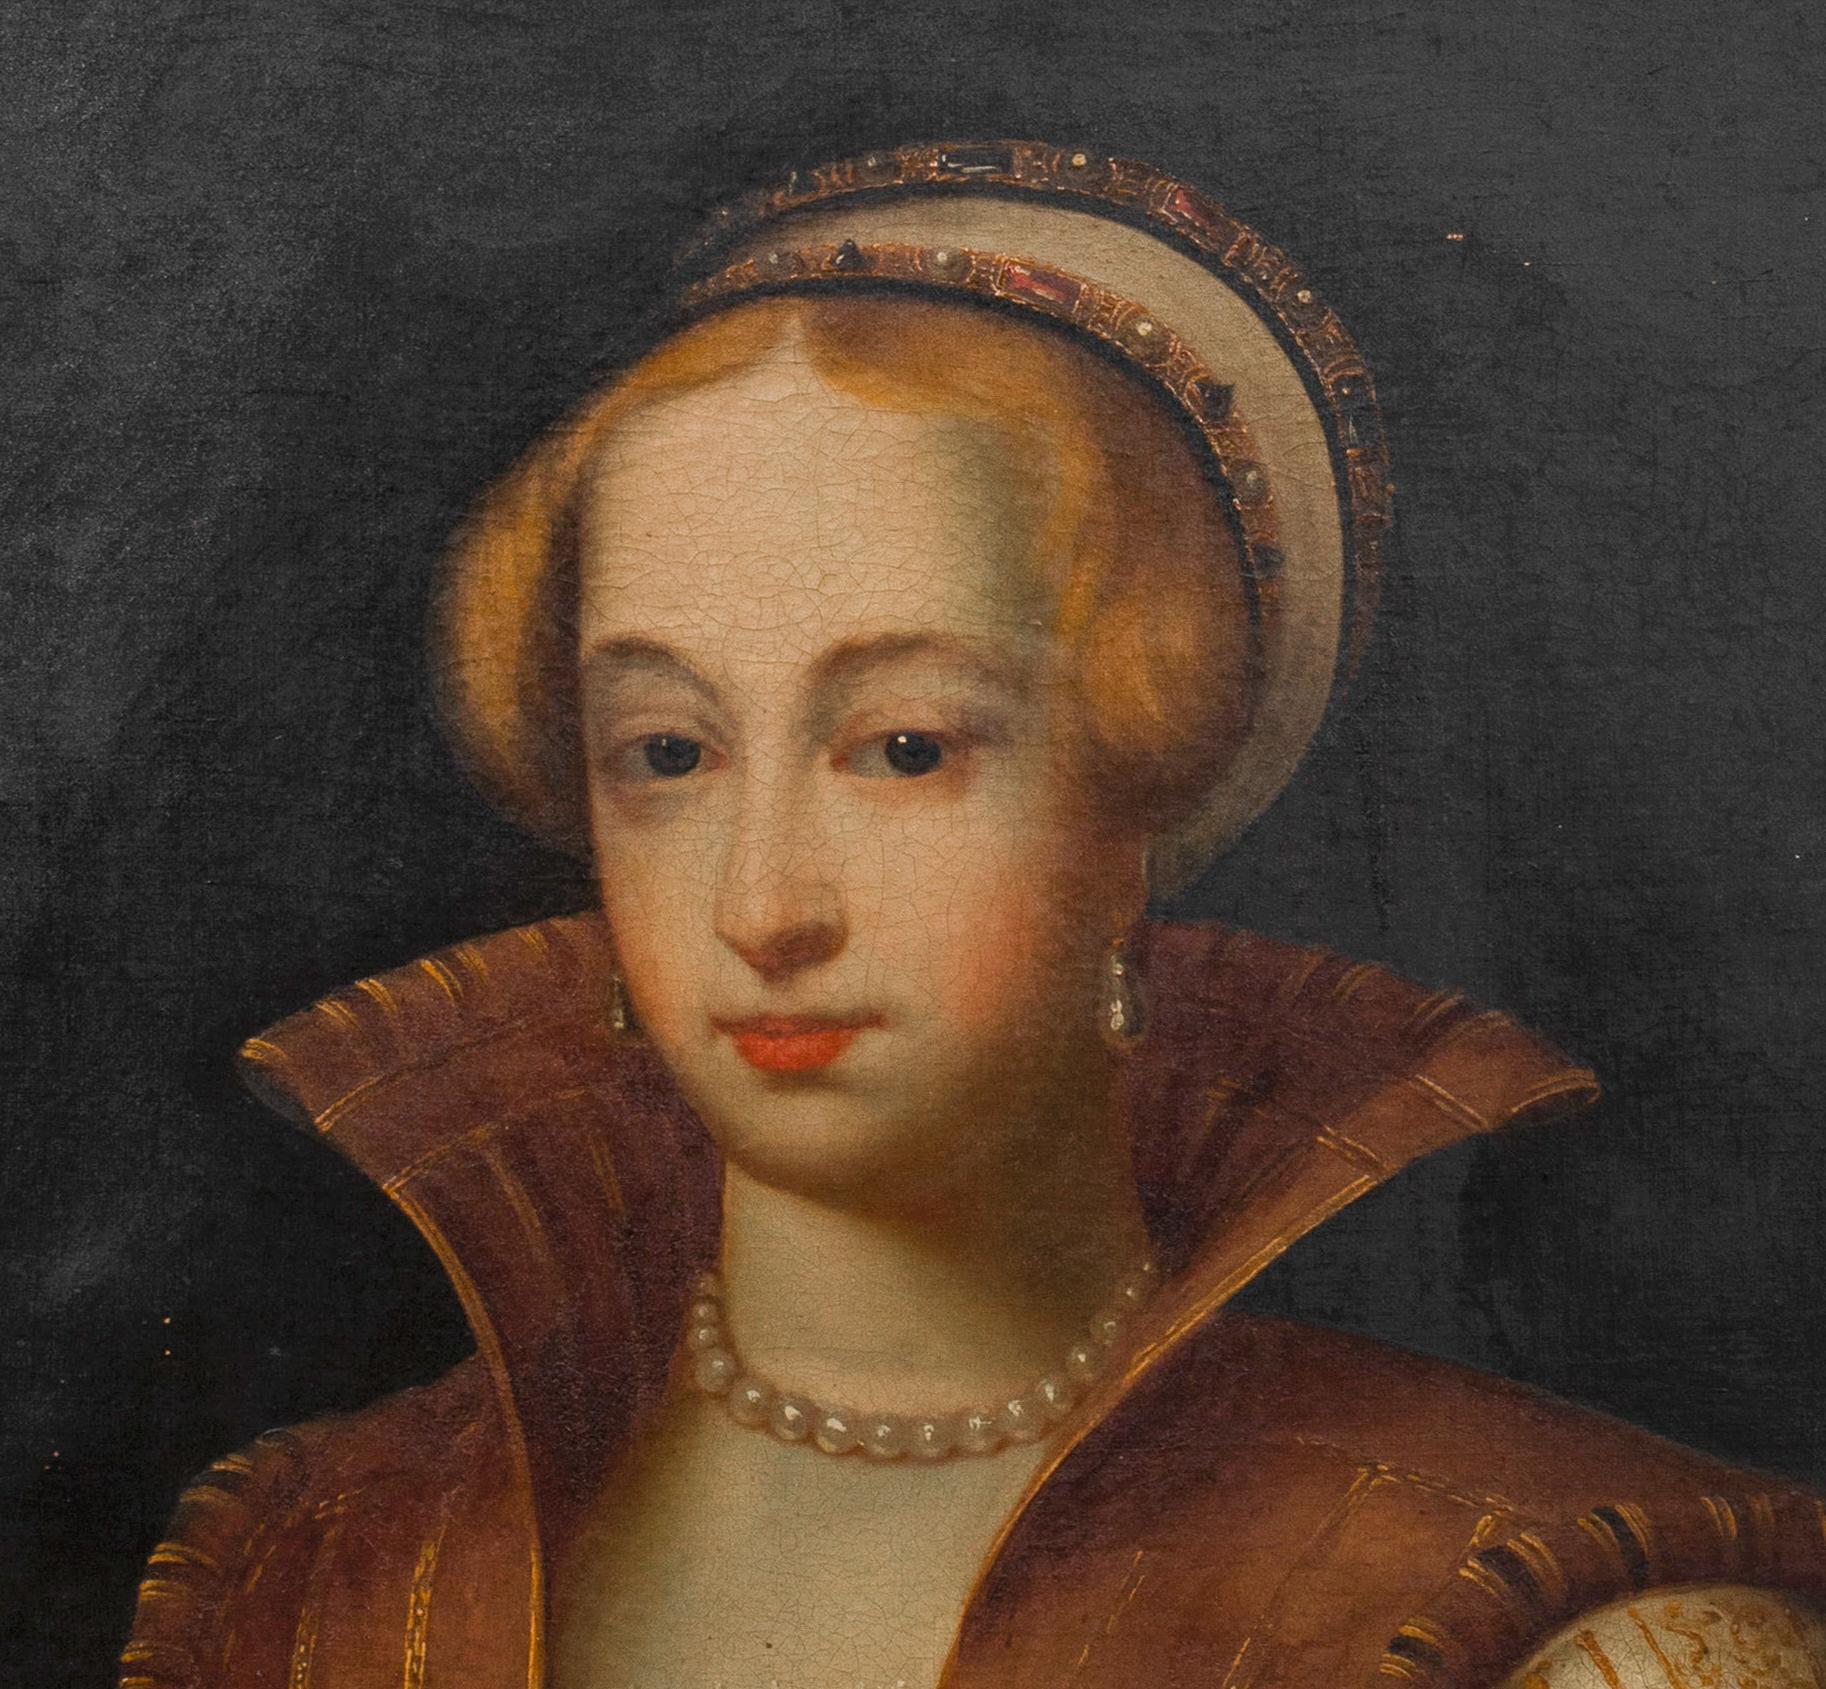 Portrait Of Queen Mary I Of England (1516-1558), 17th Century   - Brown Portrait Painting by Unknown